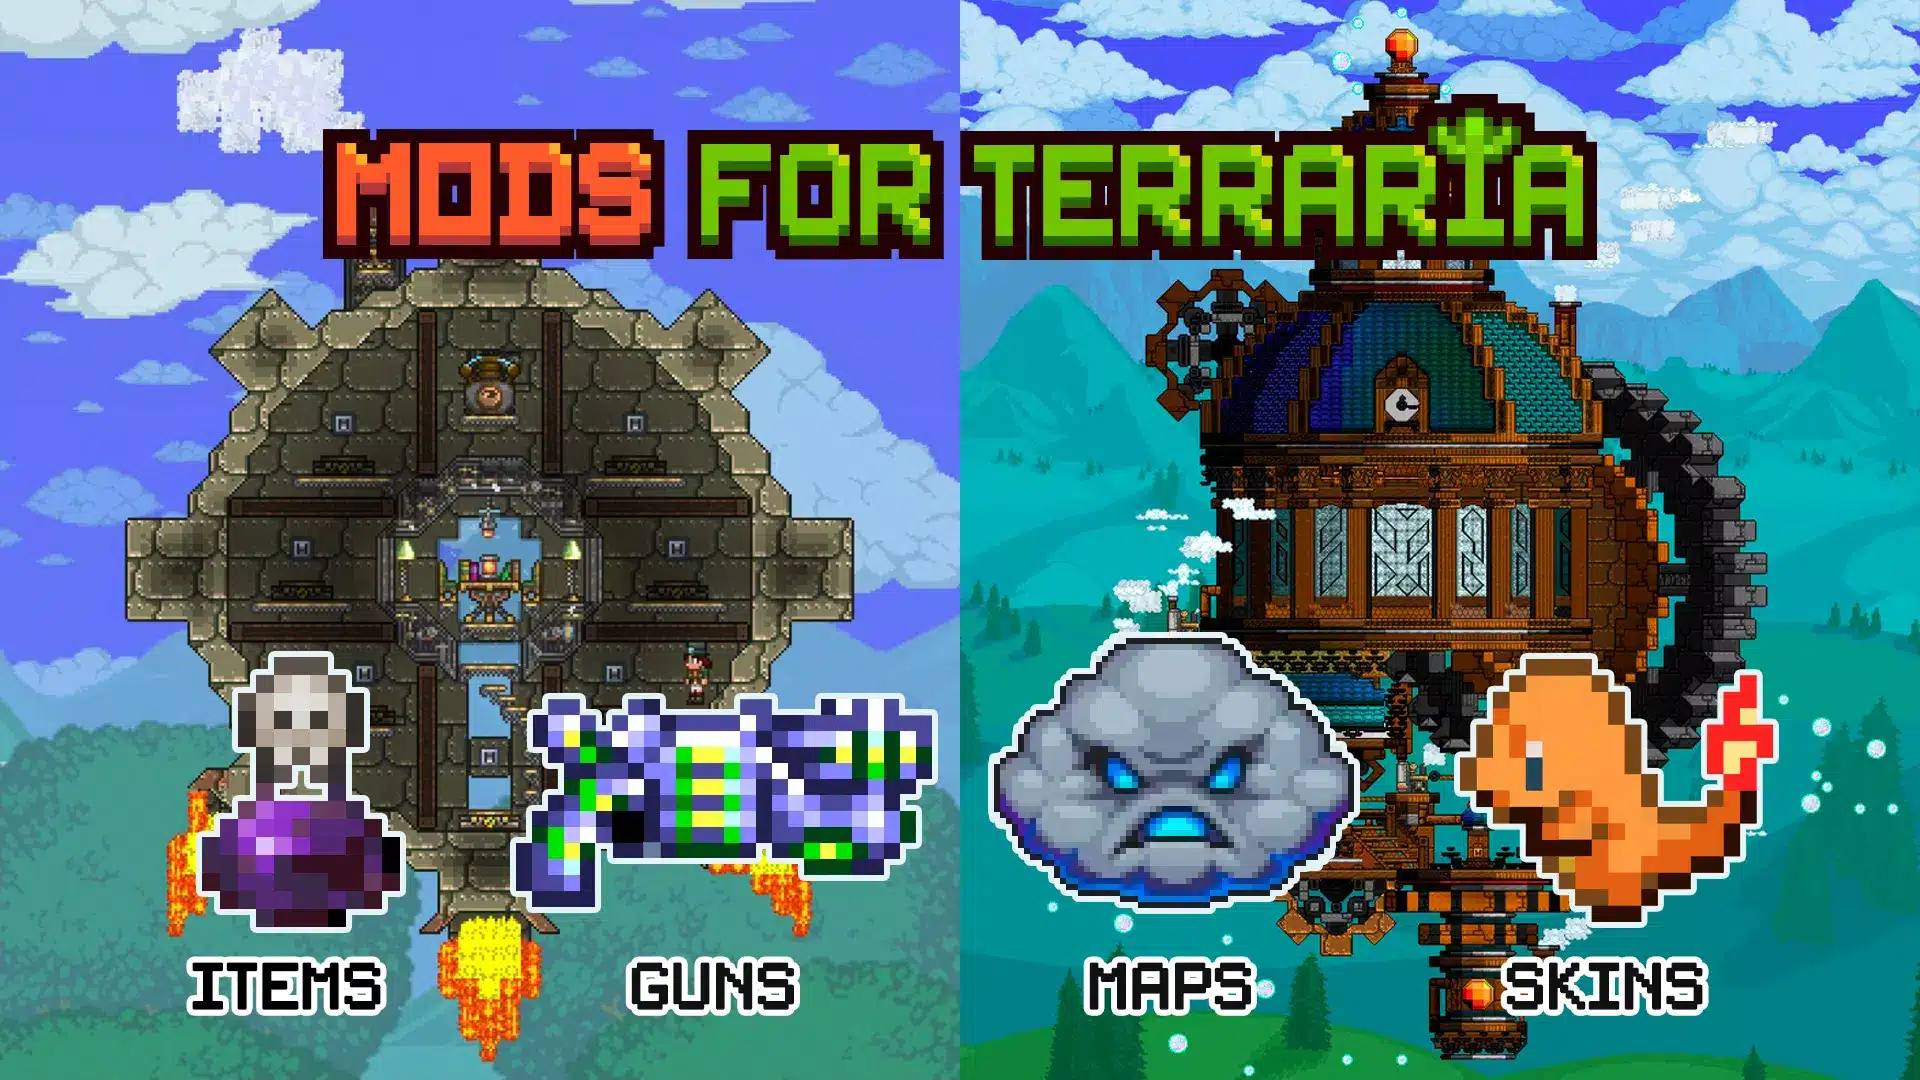 Mods for Terraria – Map n Skin Image 4